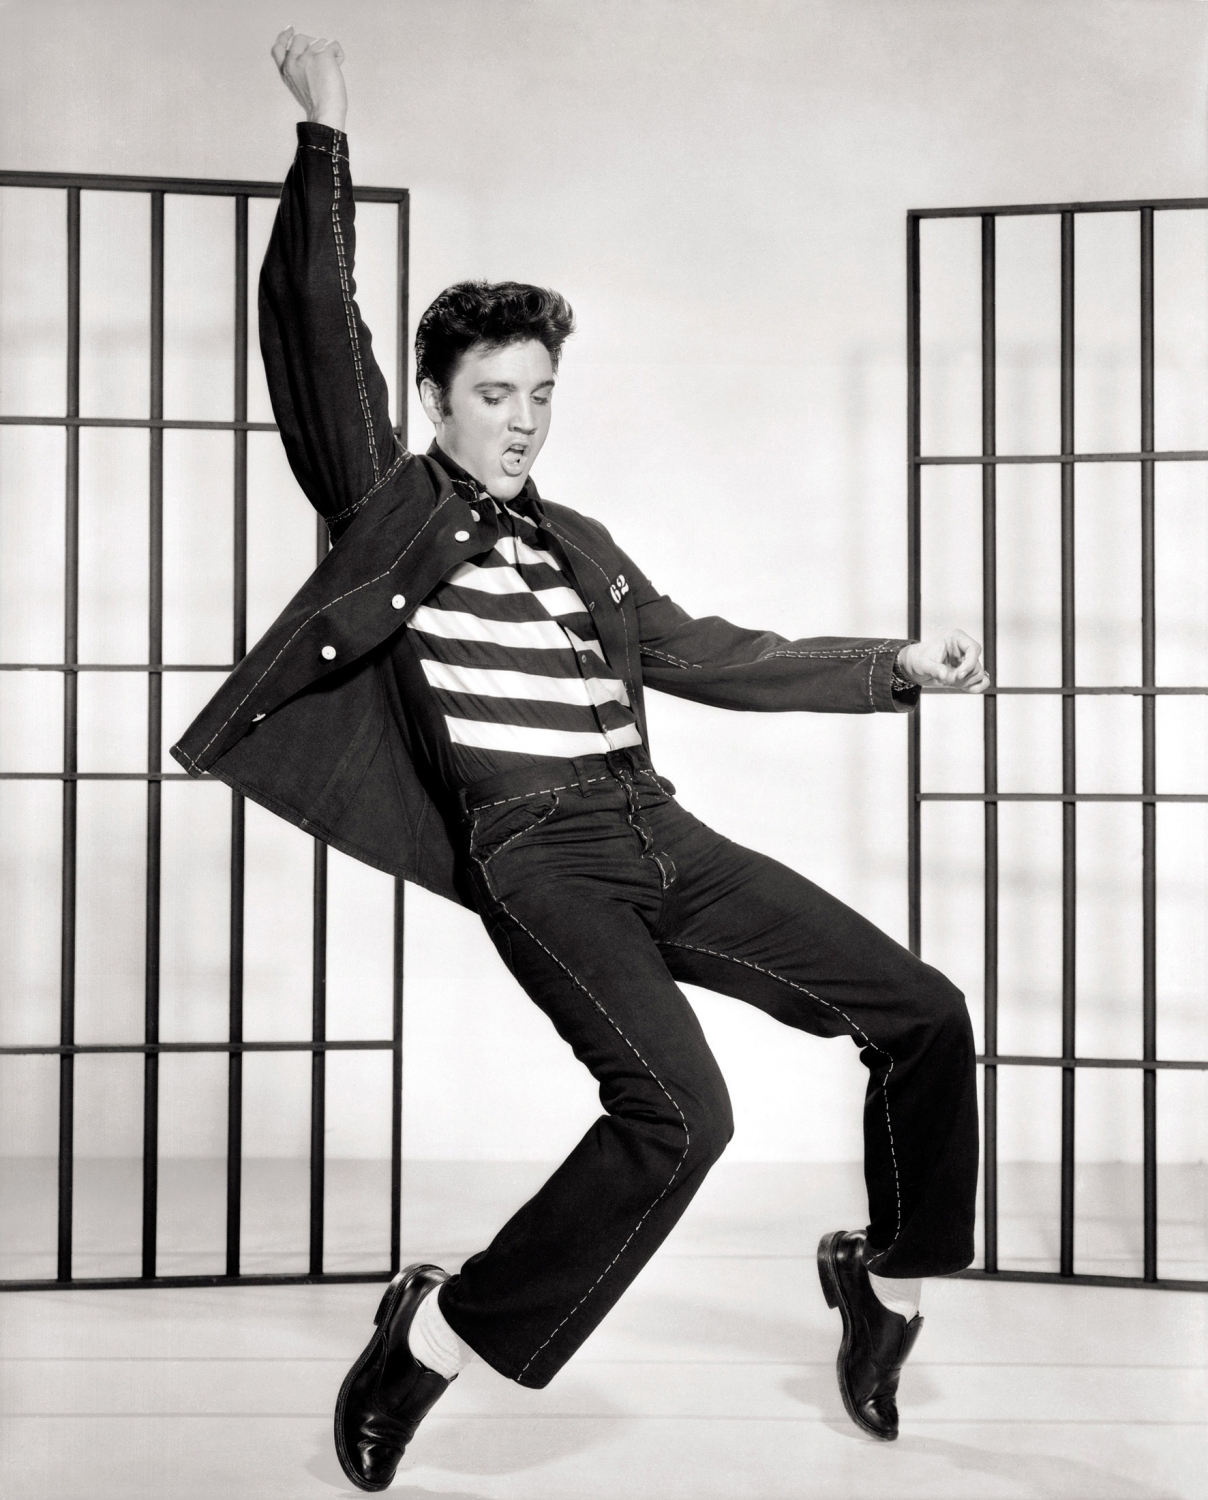 A tribute to the king of Rock & Roll Elvis Presley